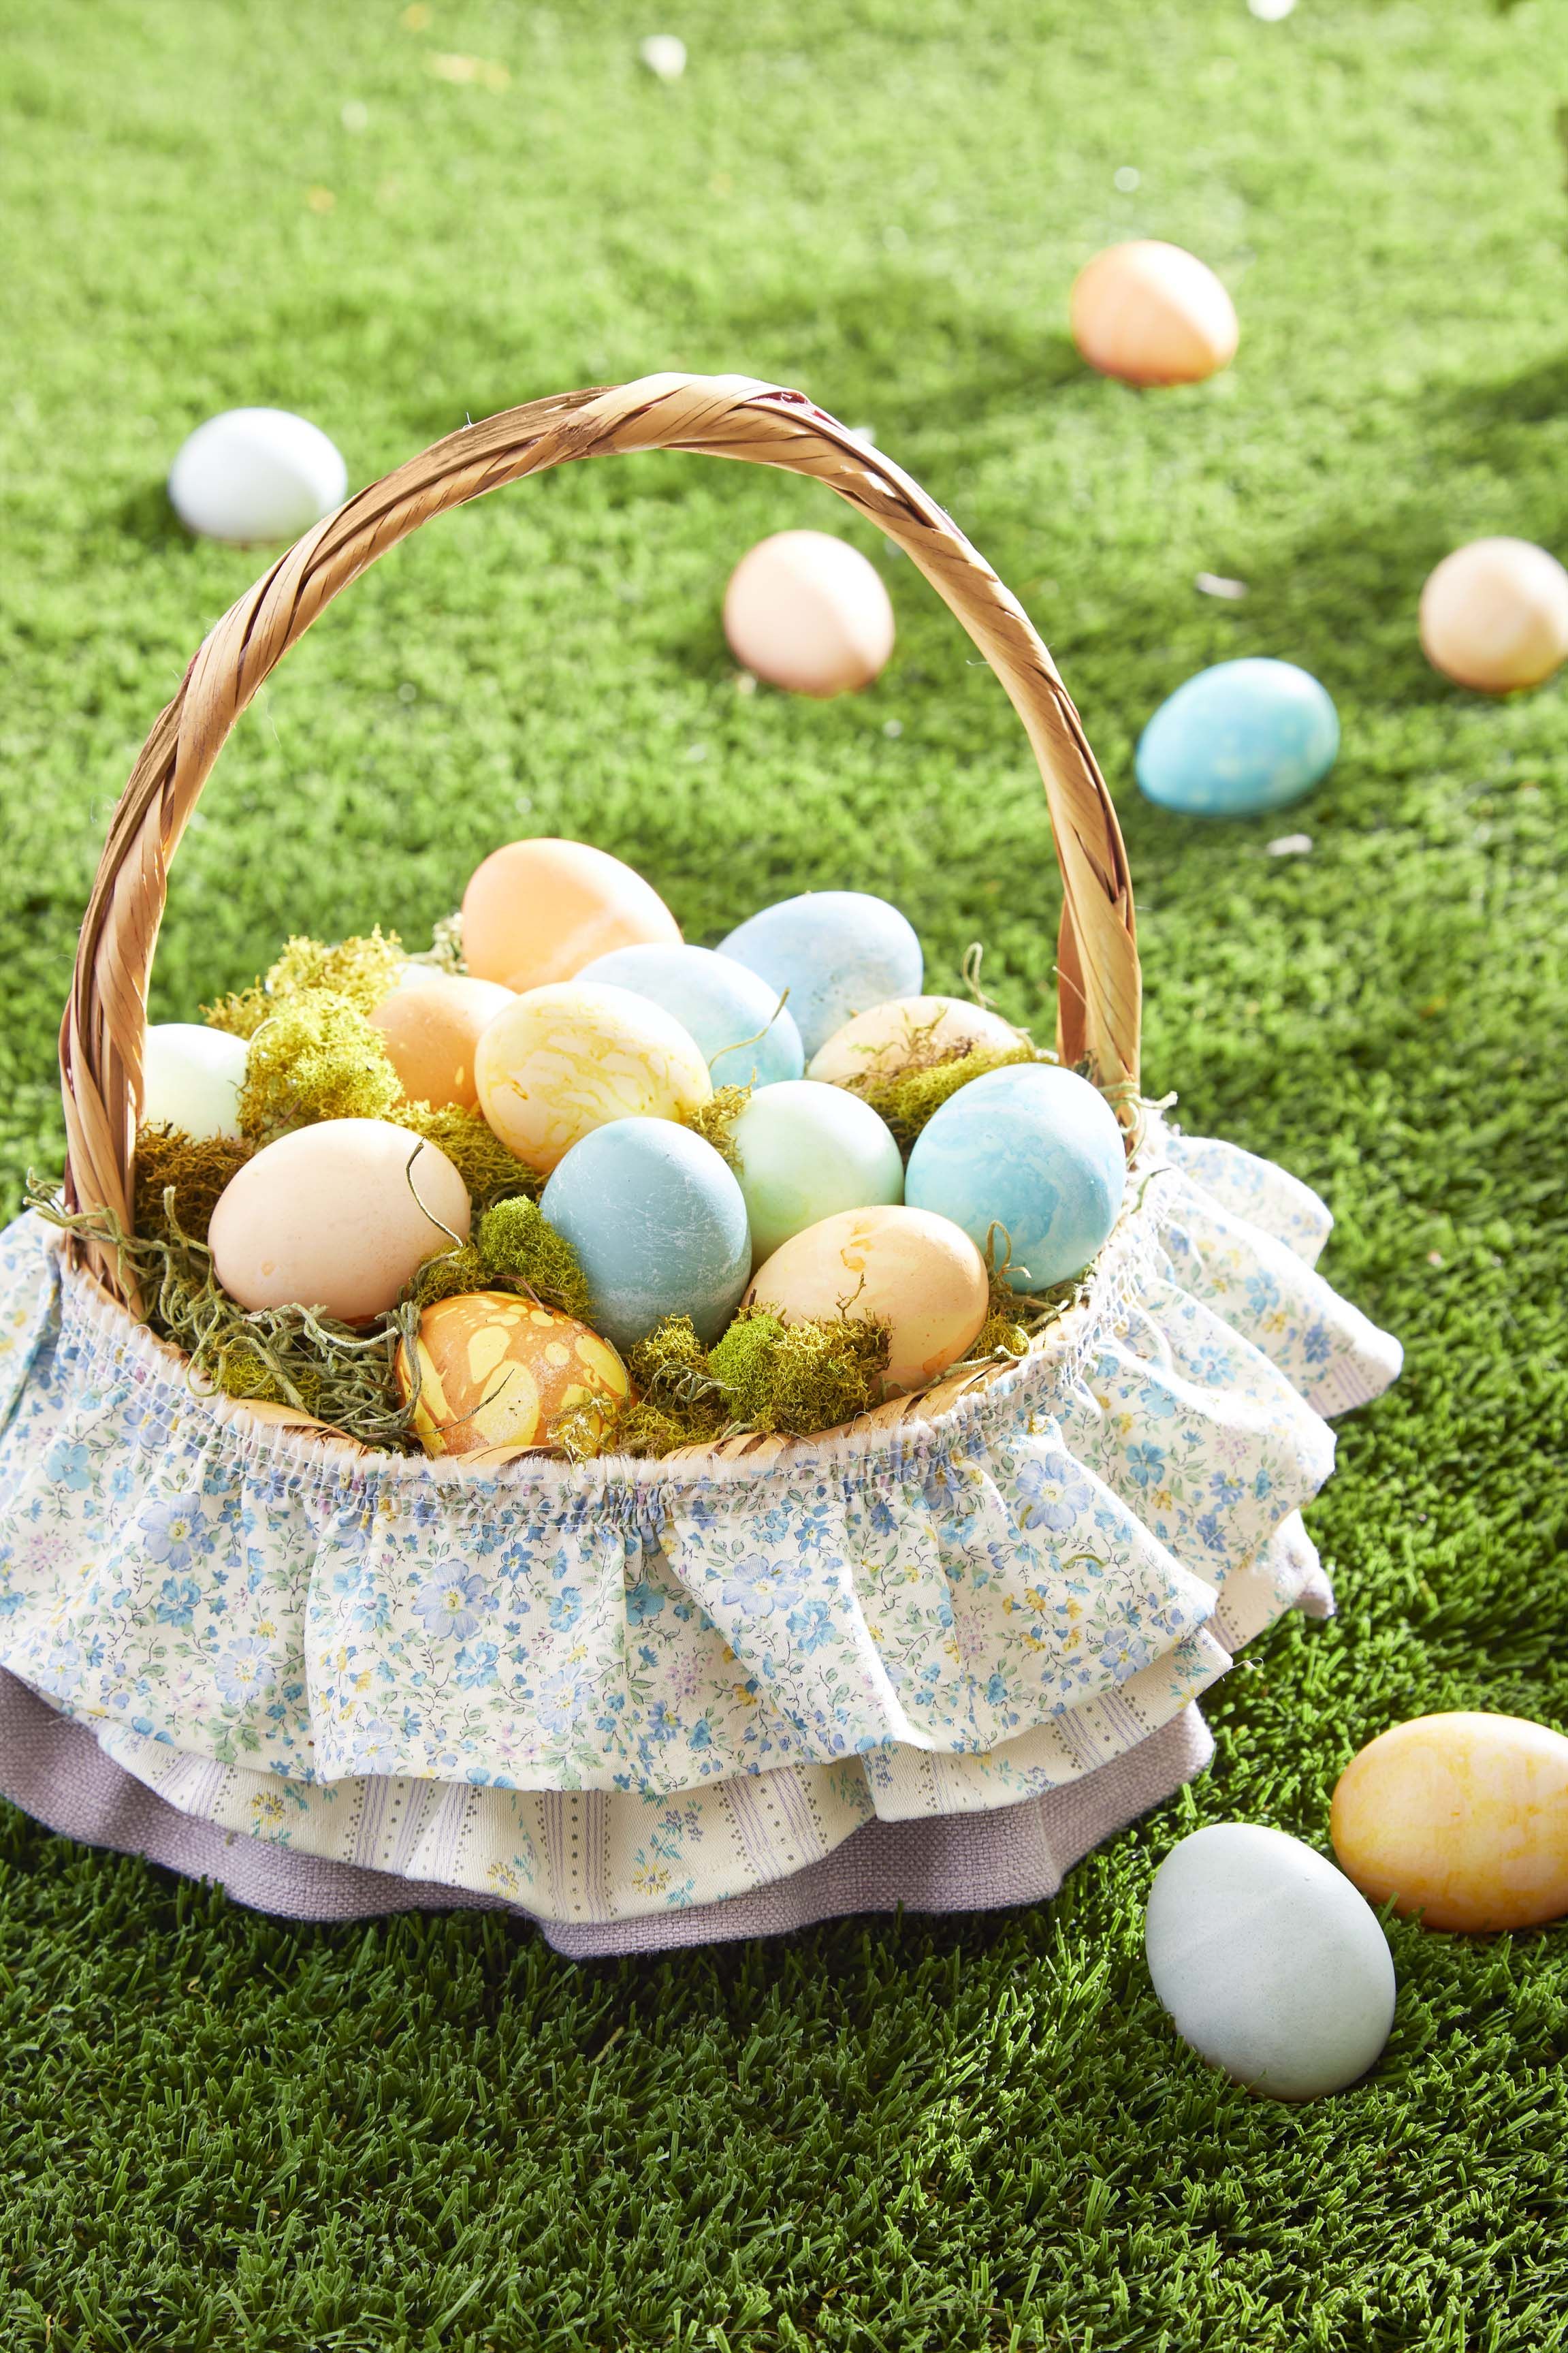 These Easter Crafts Are Perfect for the Family - DIY Candy